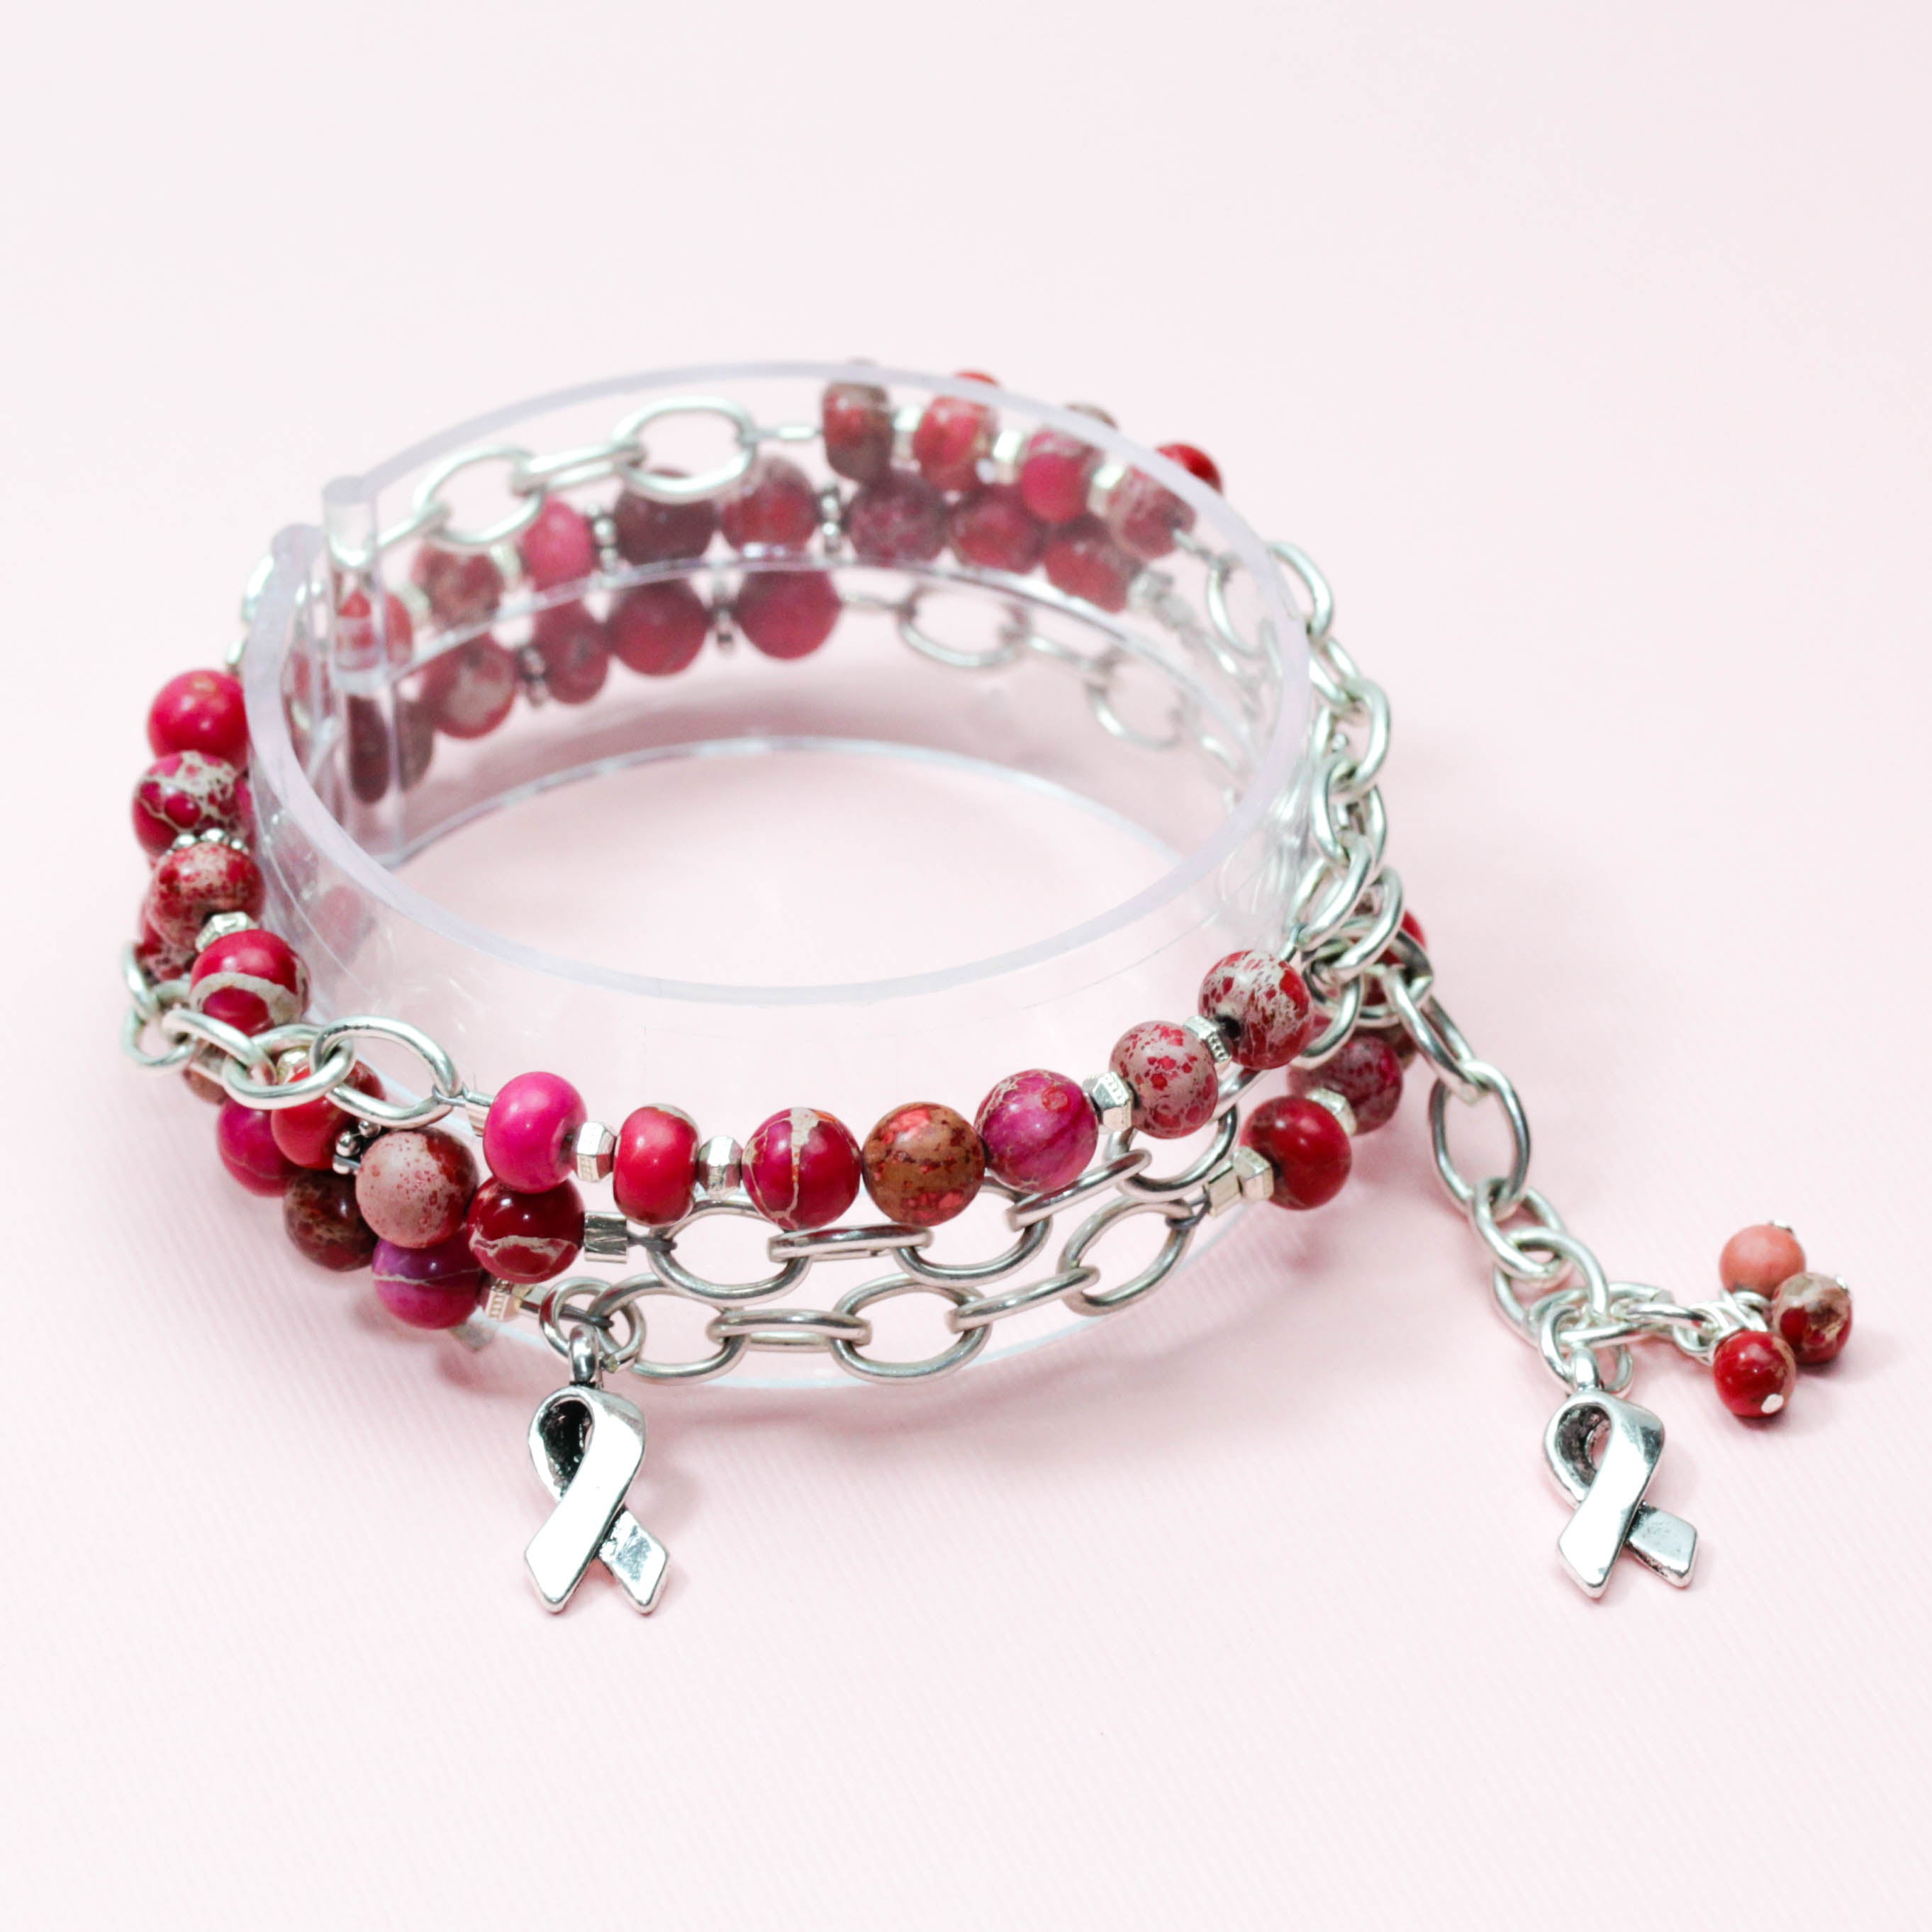 Pink Is Stronger Than You Think Triple Wrap Bracelet - Goody Beads